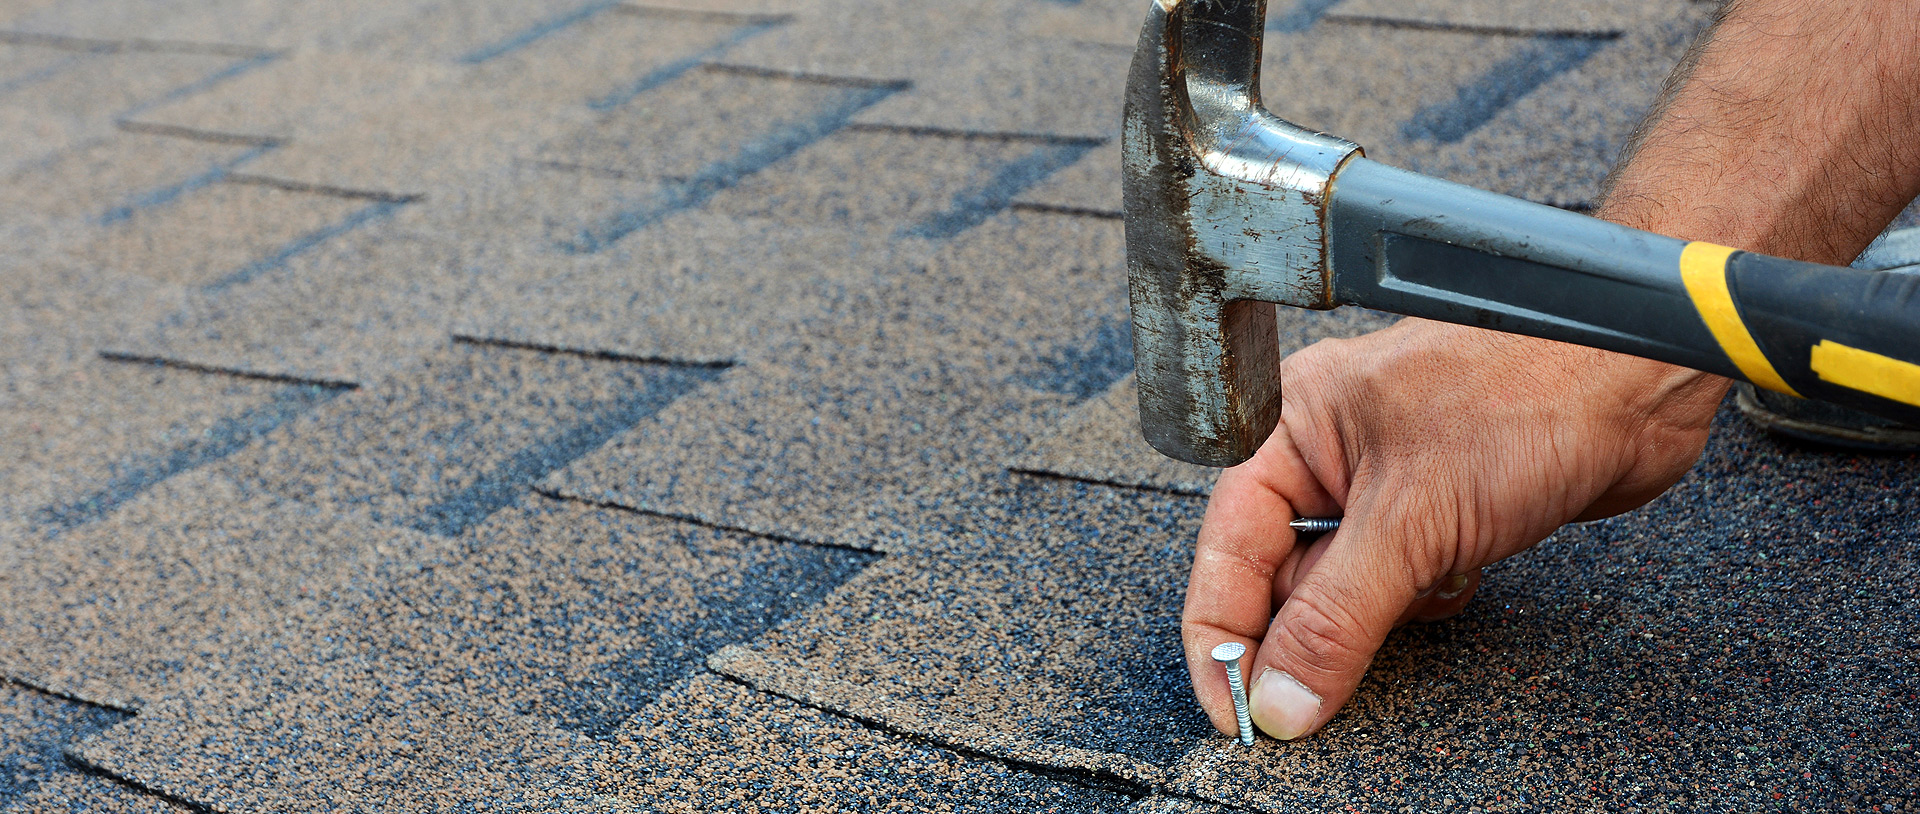 Superior Metal Roof and Asphalt Shingle Replacement Services in mid-Michigan